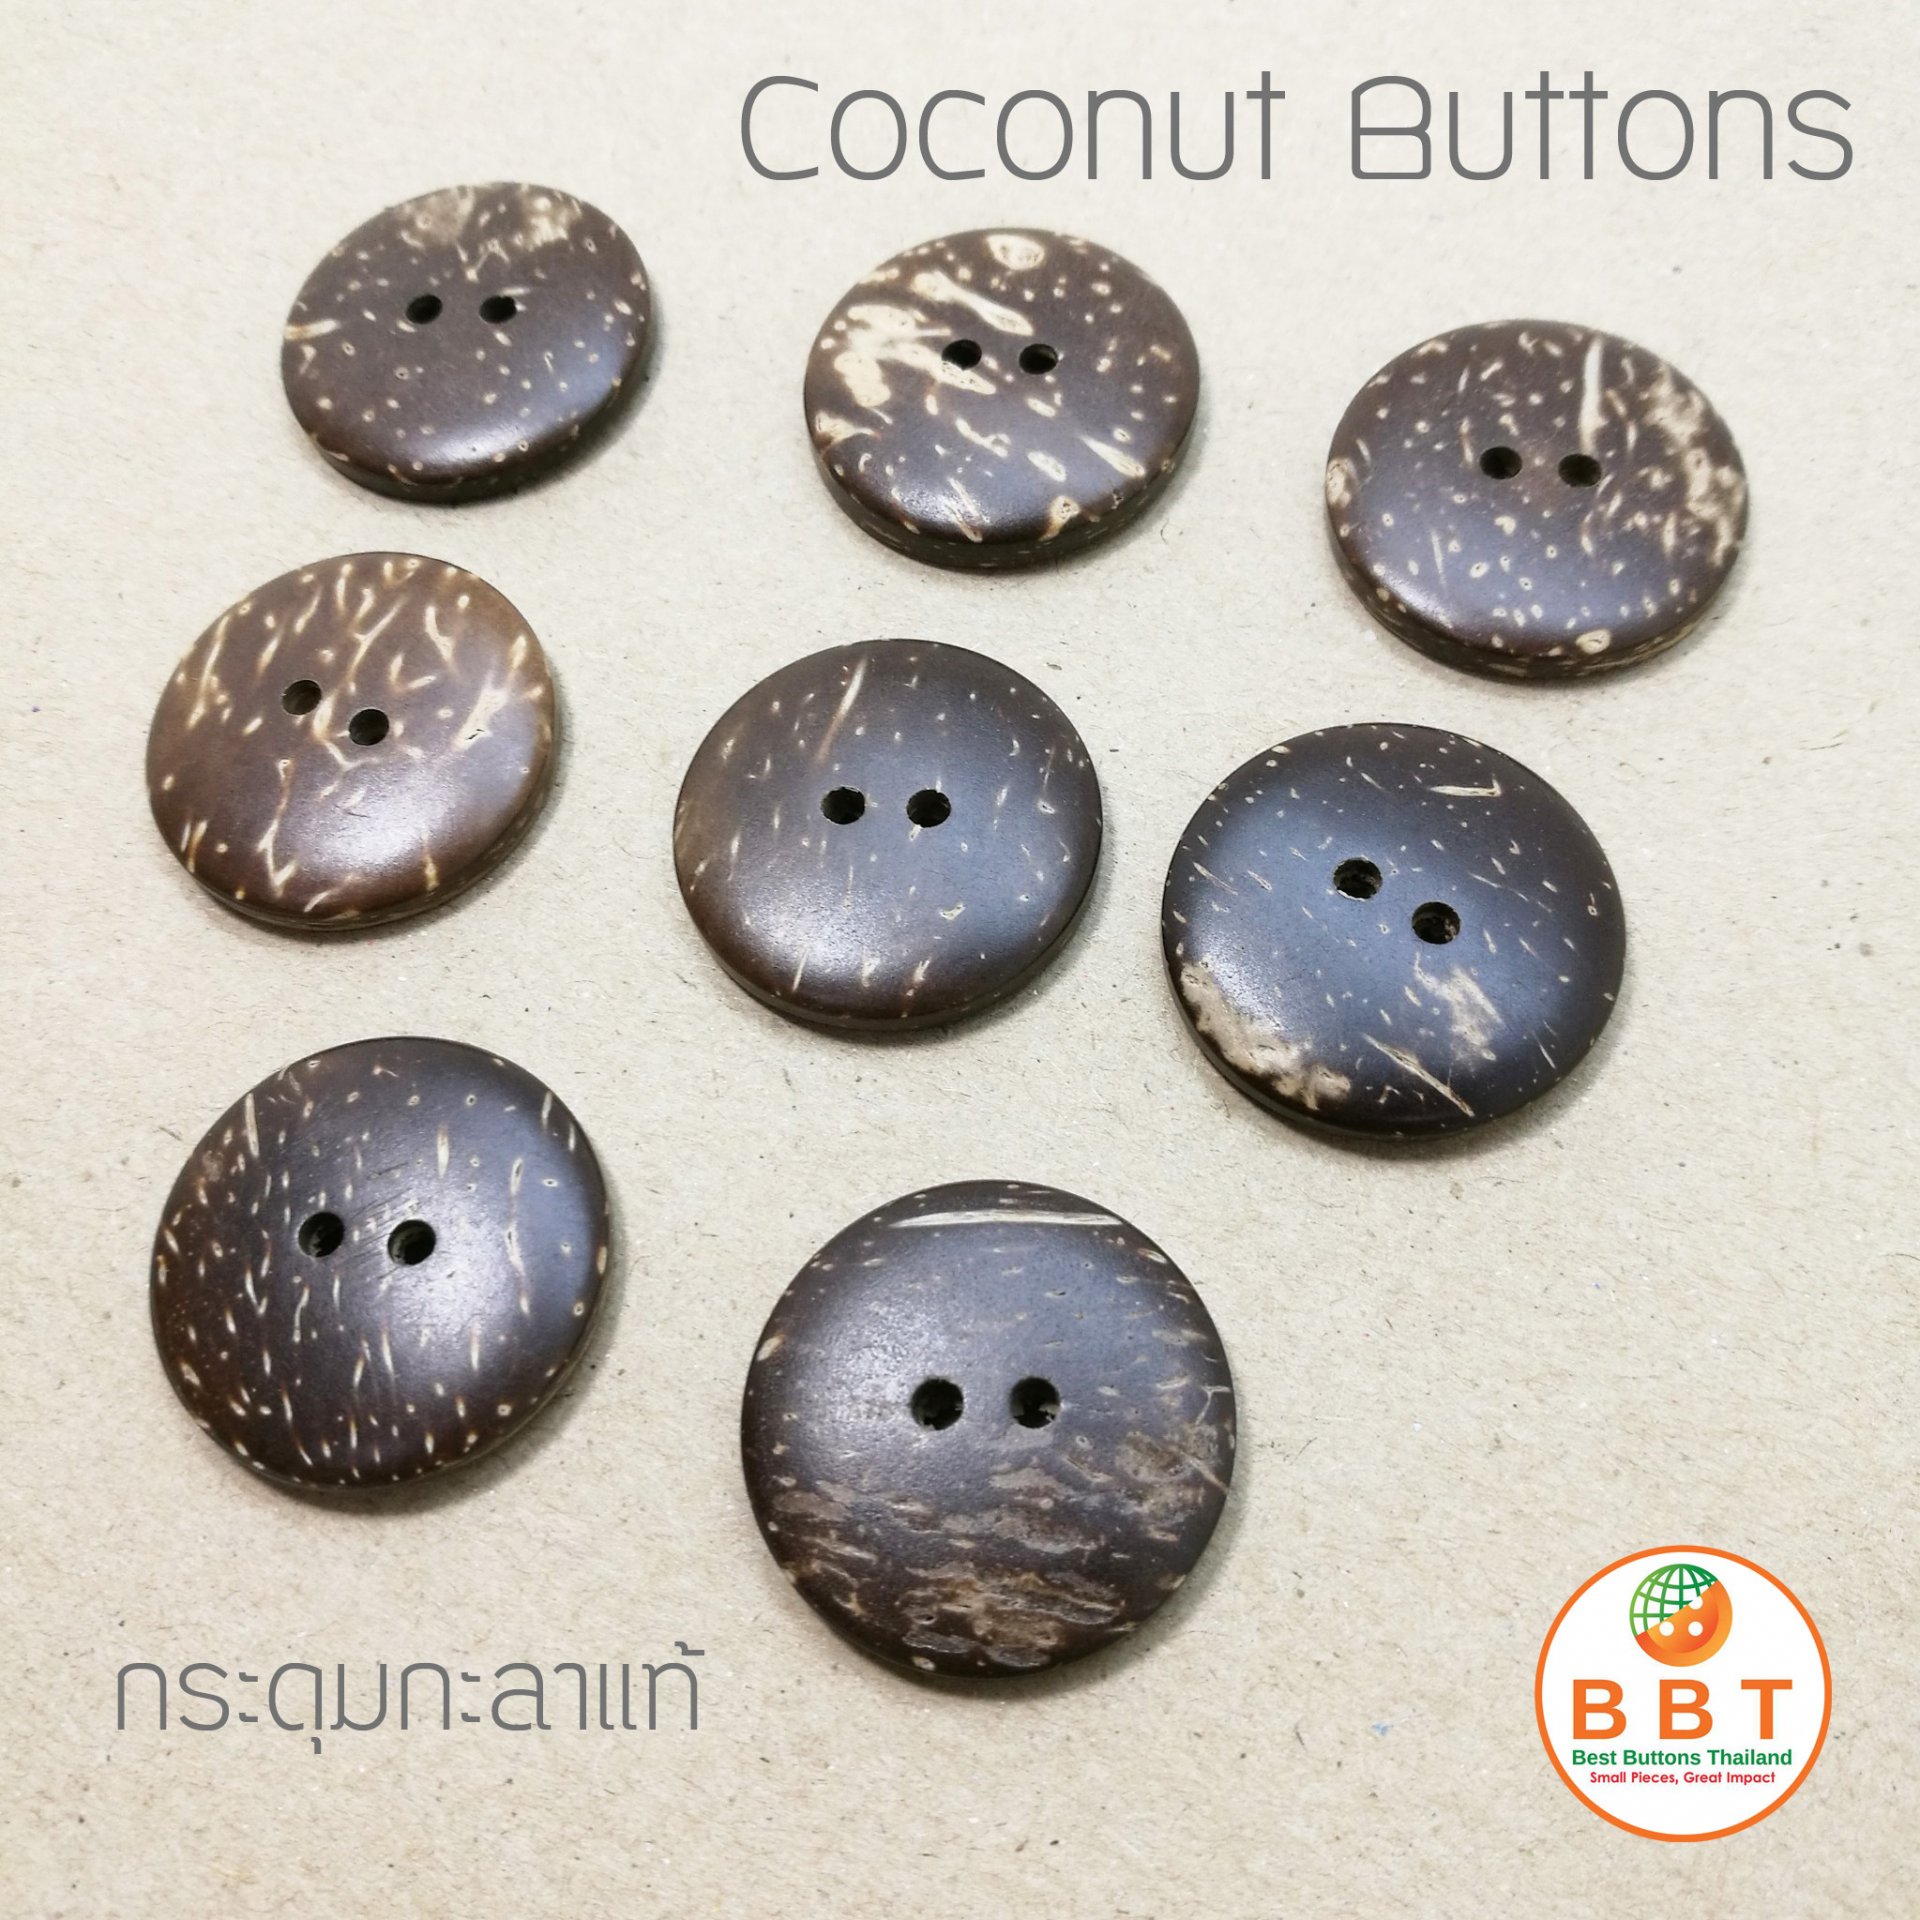 Coconut Buttons Size 18 mm.